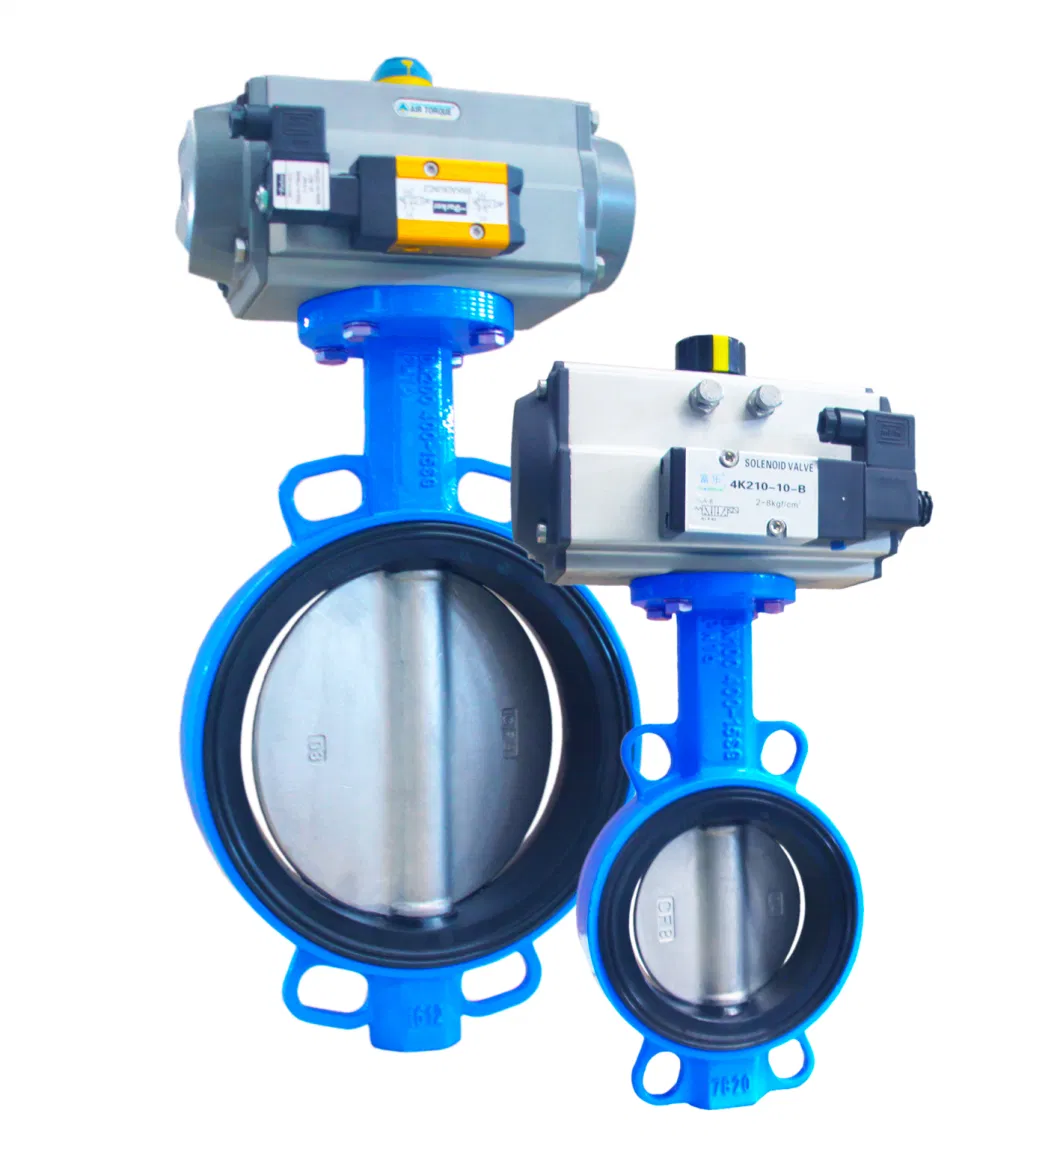 Export Quality Gearbox Operated Ductile Iron Body Wafer Butterfly Valve with Concentric Design